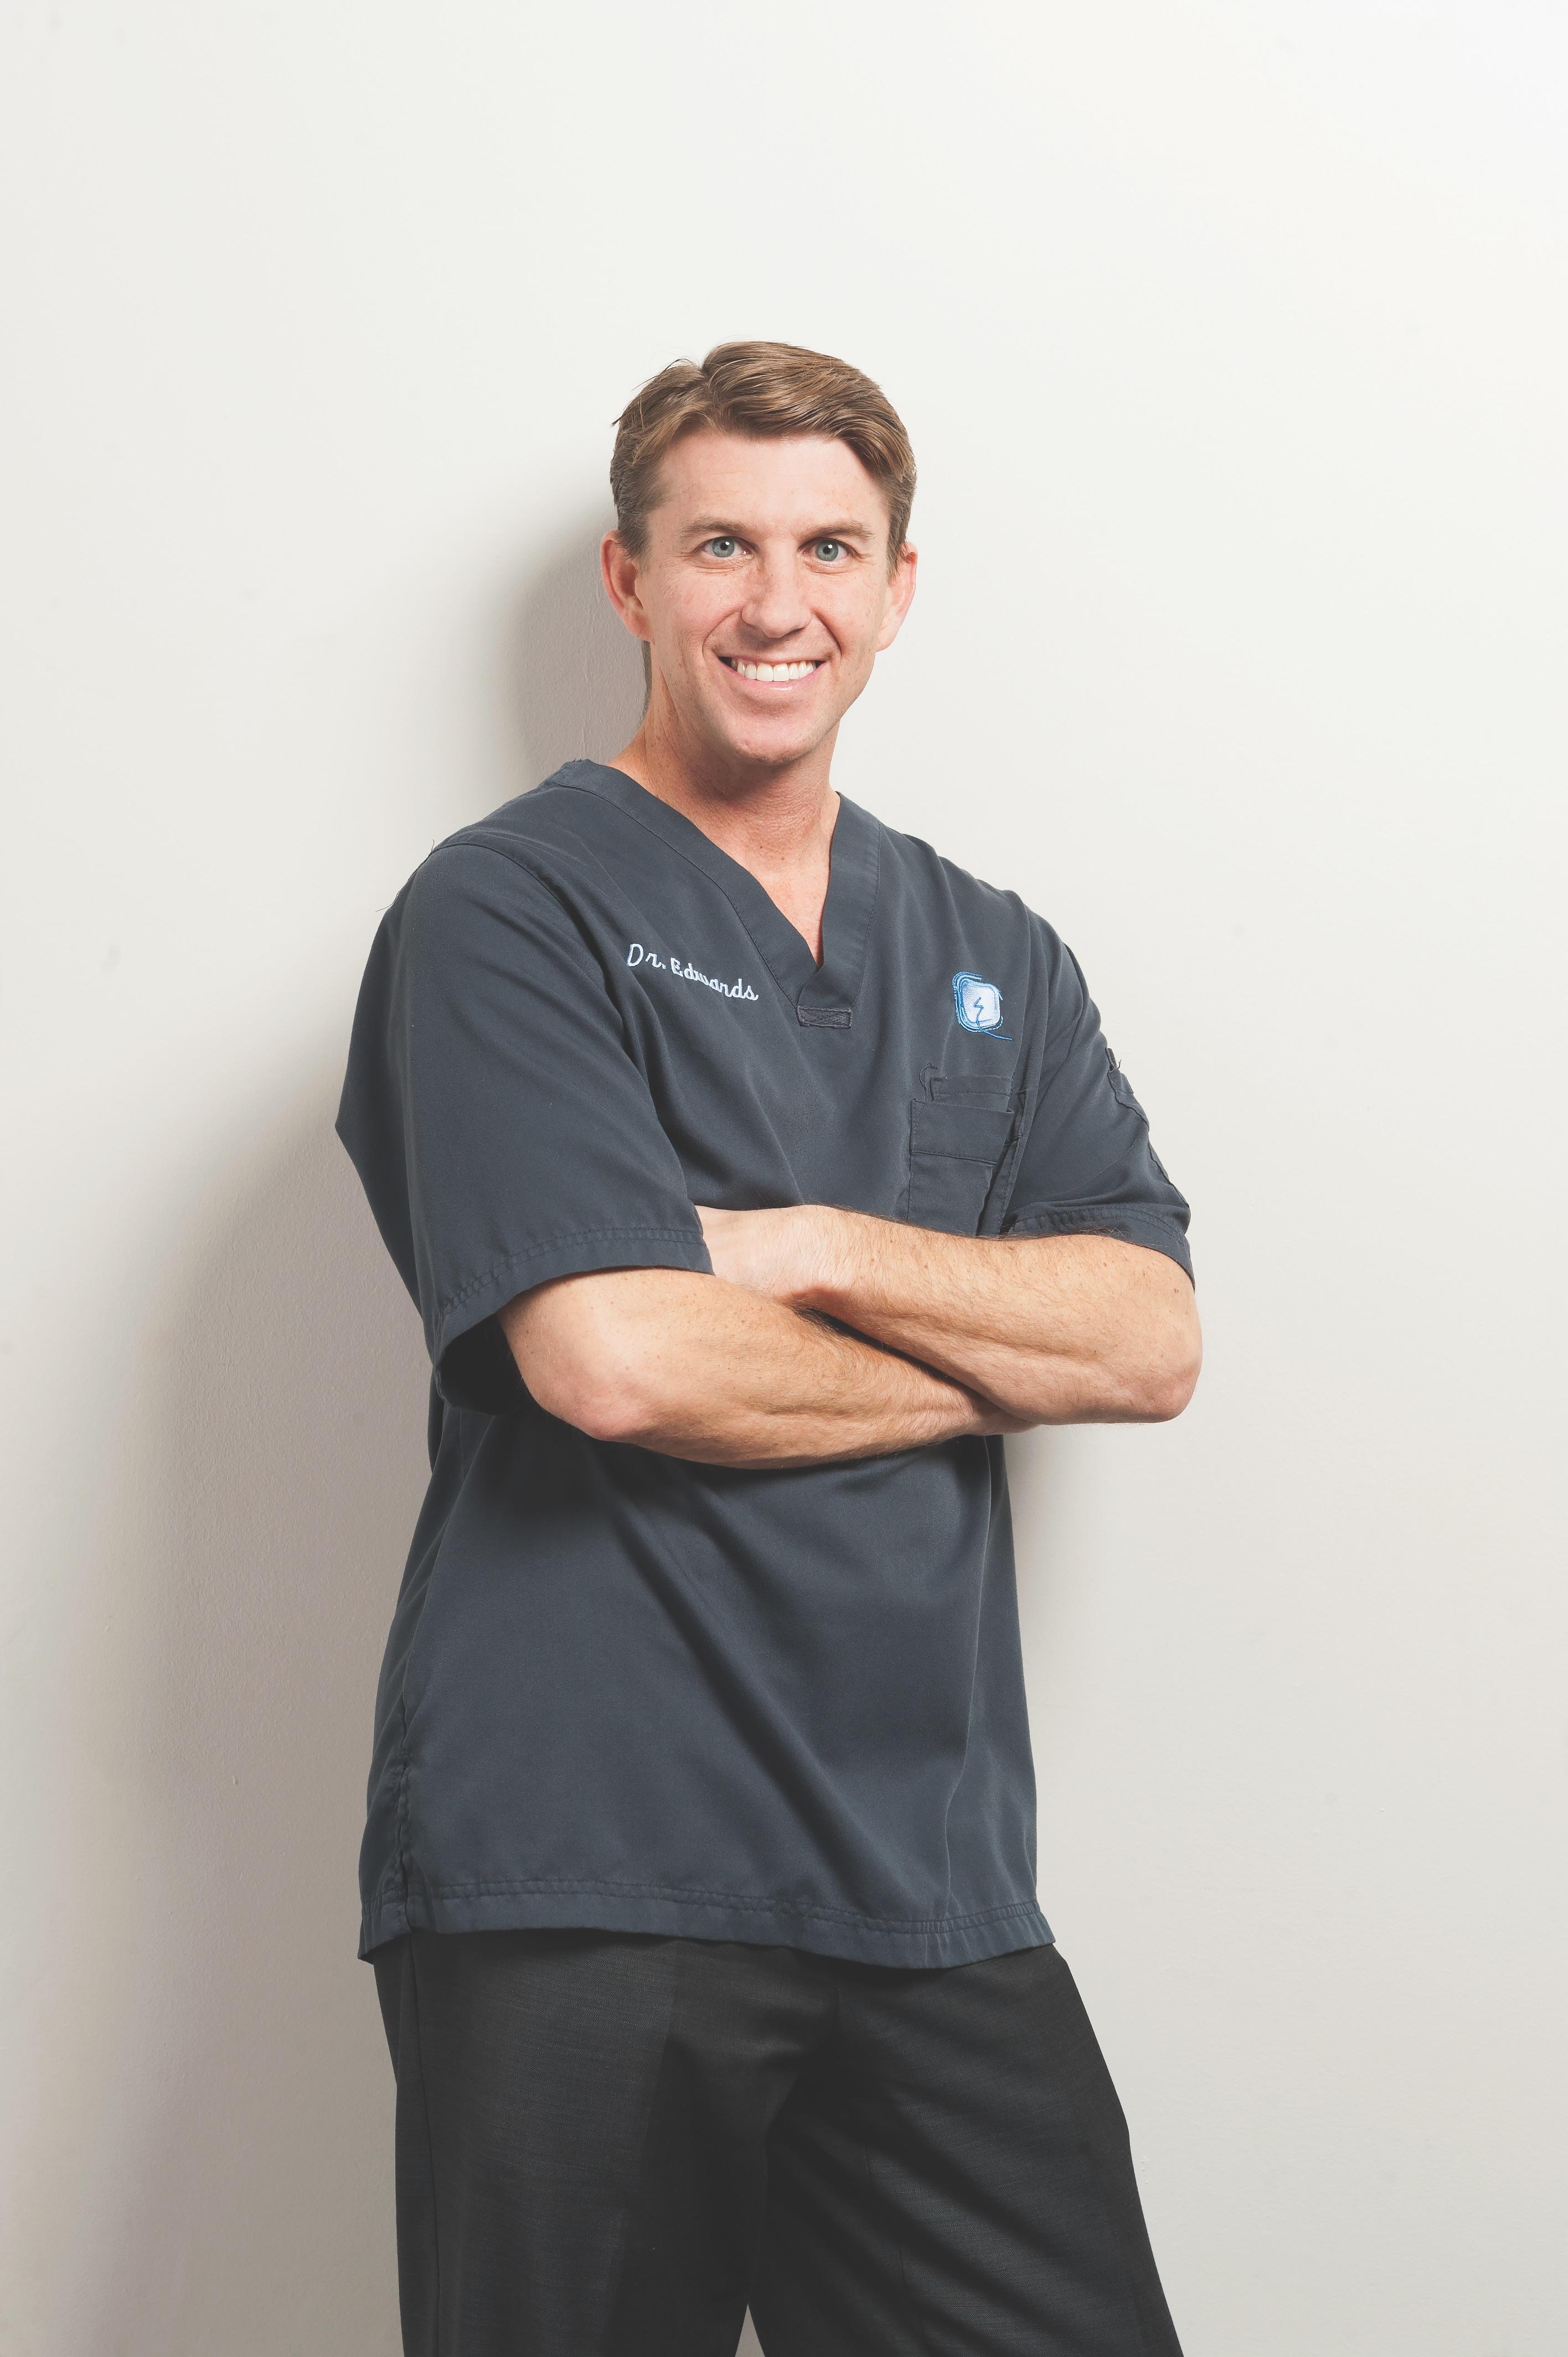 Implant Dentistry and Periodontics: Michael D. Edwards DDS, MSD Photo